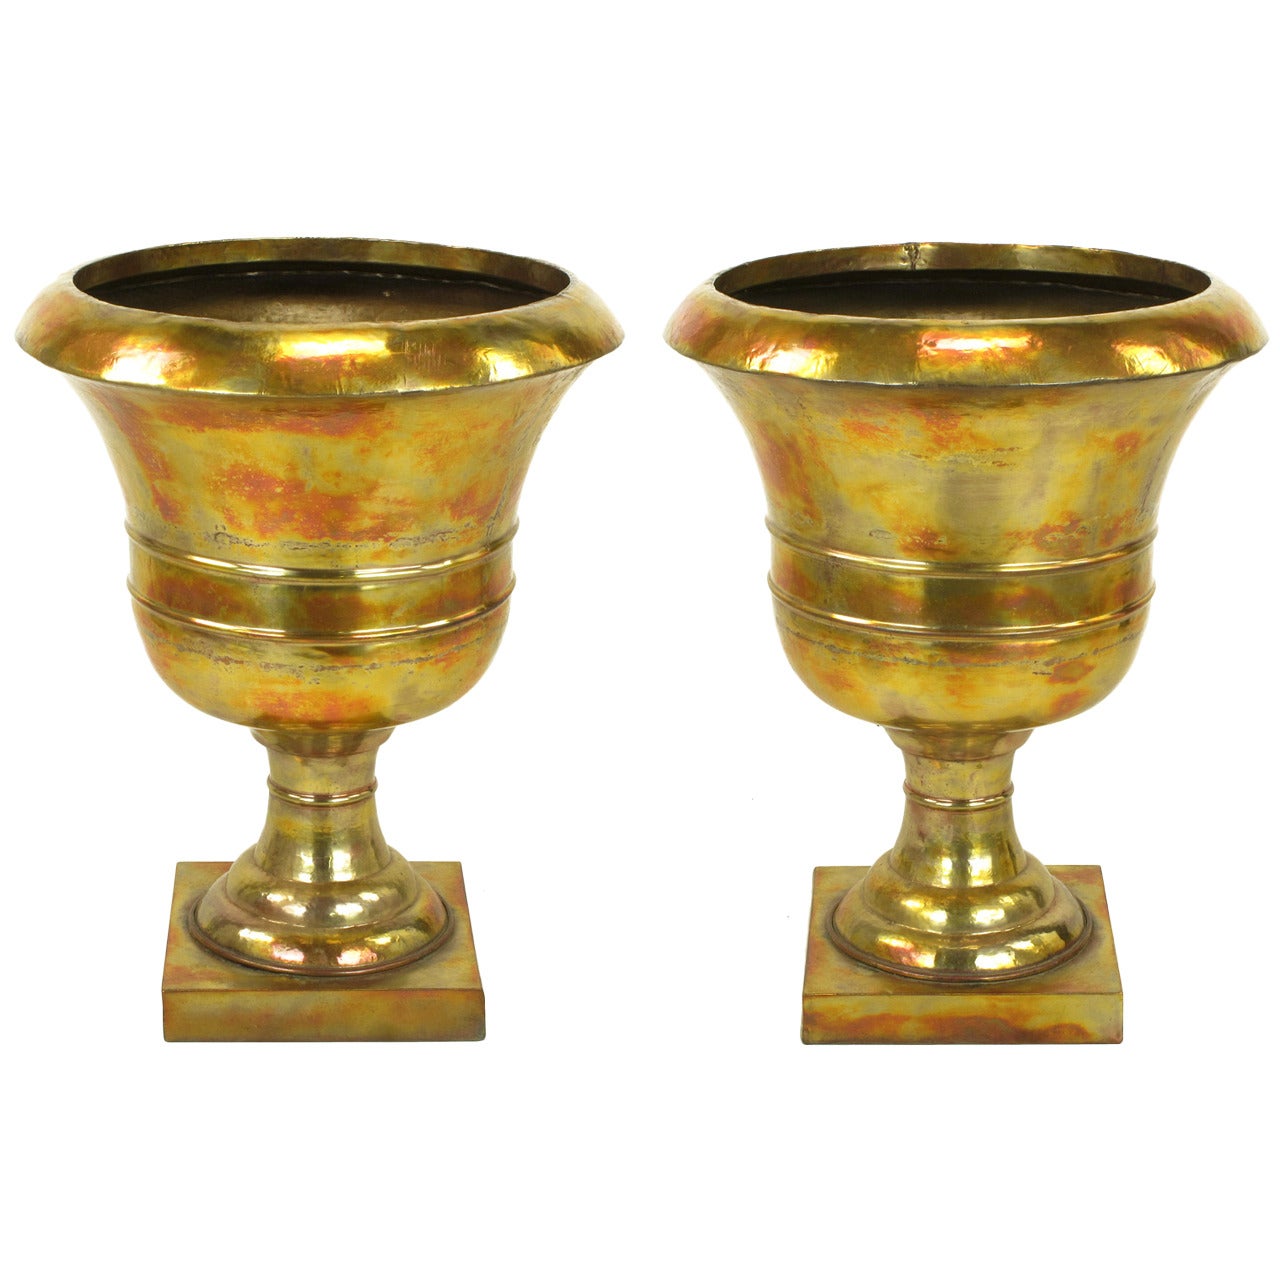 Palatial Pair of Tall Acid Rinsed and Hammered Brass Urns